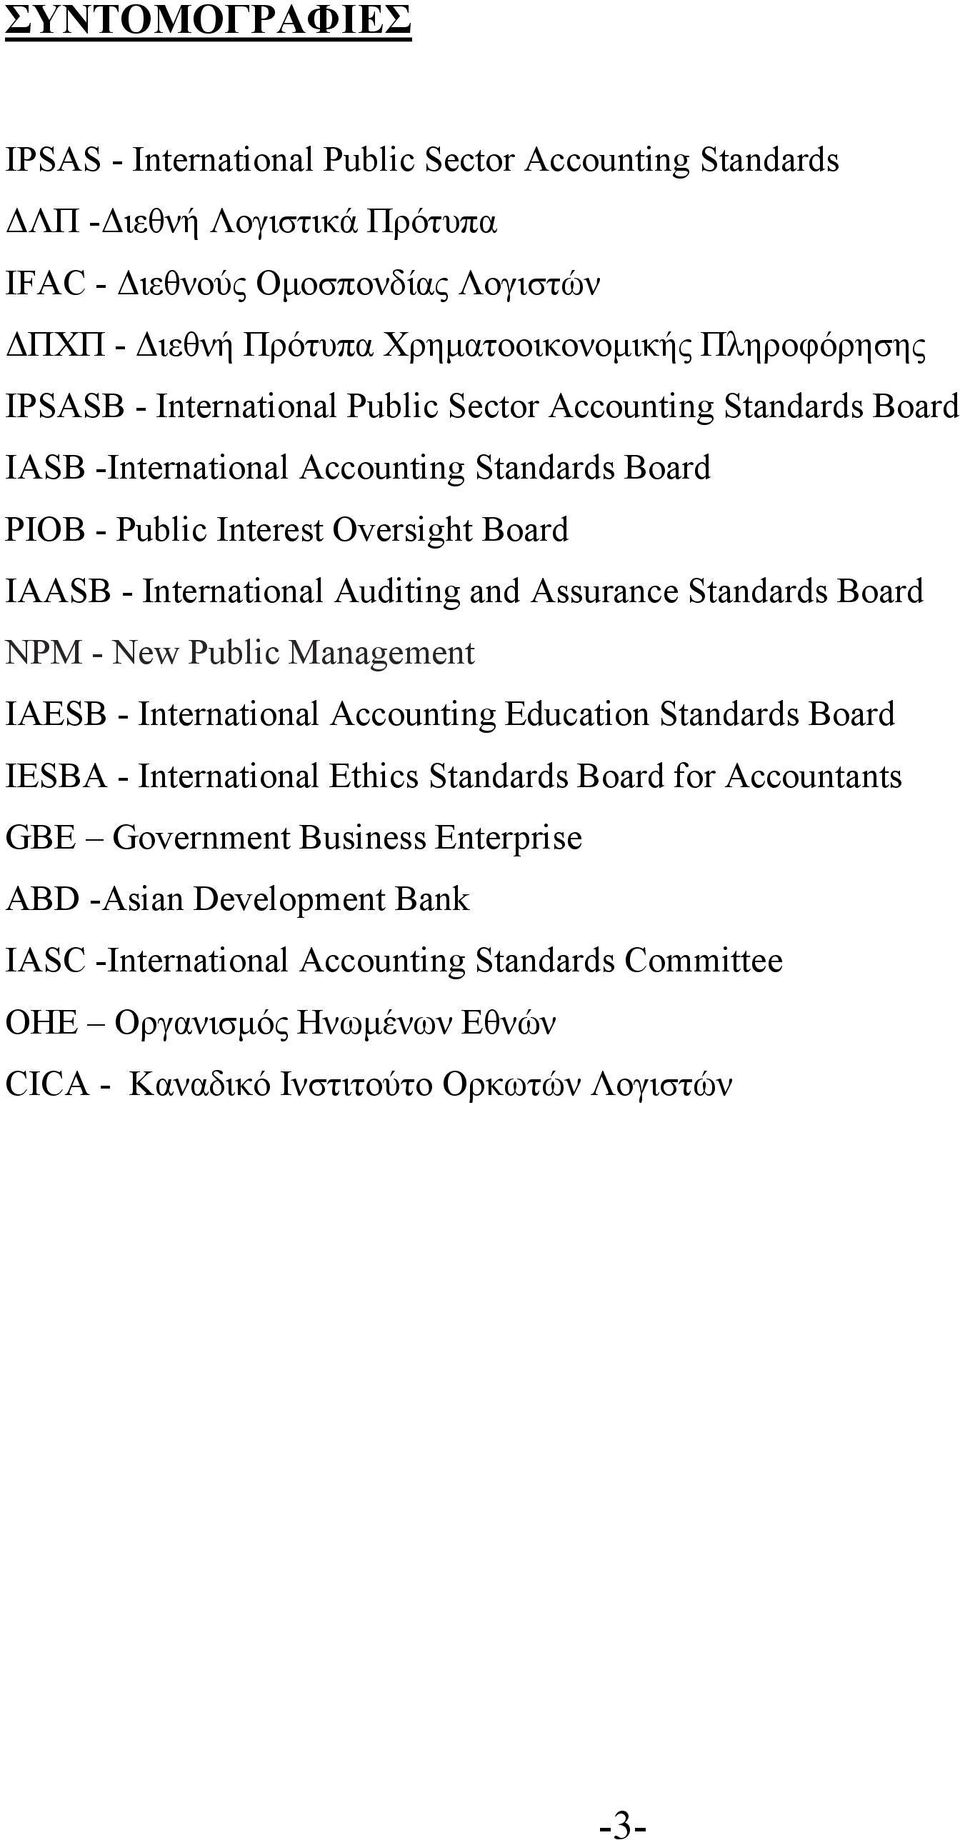 Auditing and Assurance Standards Board NPM - New Public Management IAESB - International Accounting Education Standards Board IESBA - International Ethics Standards Board for